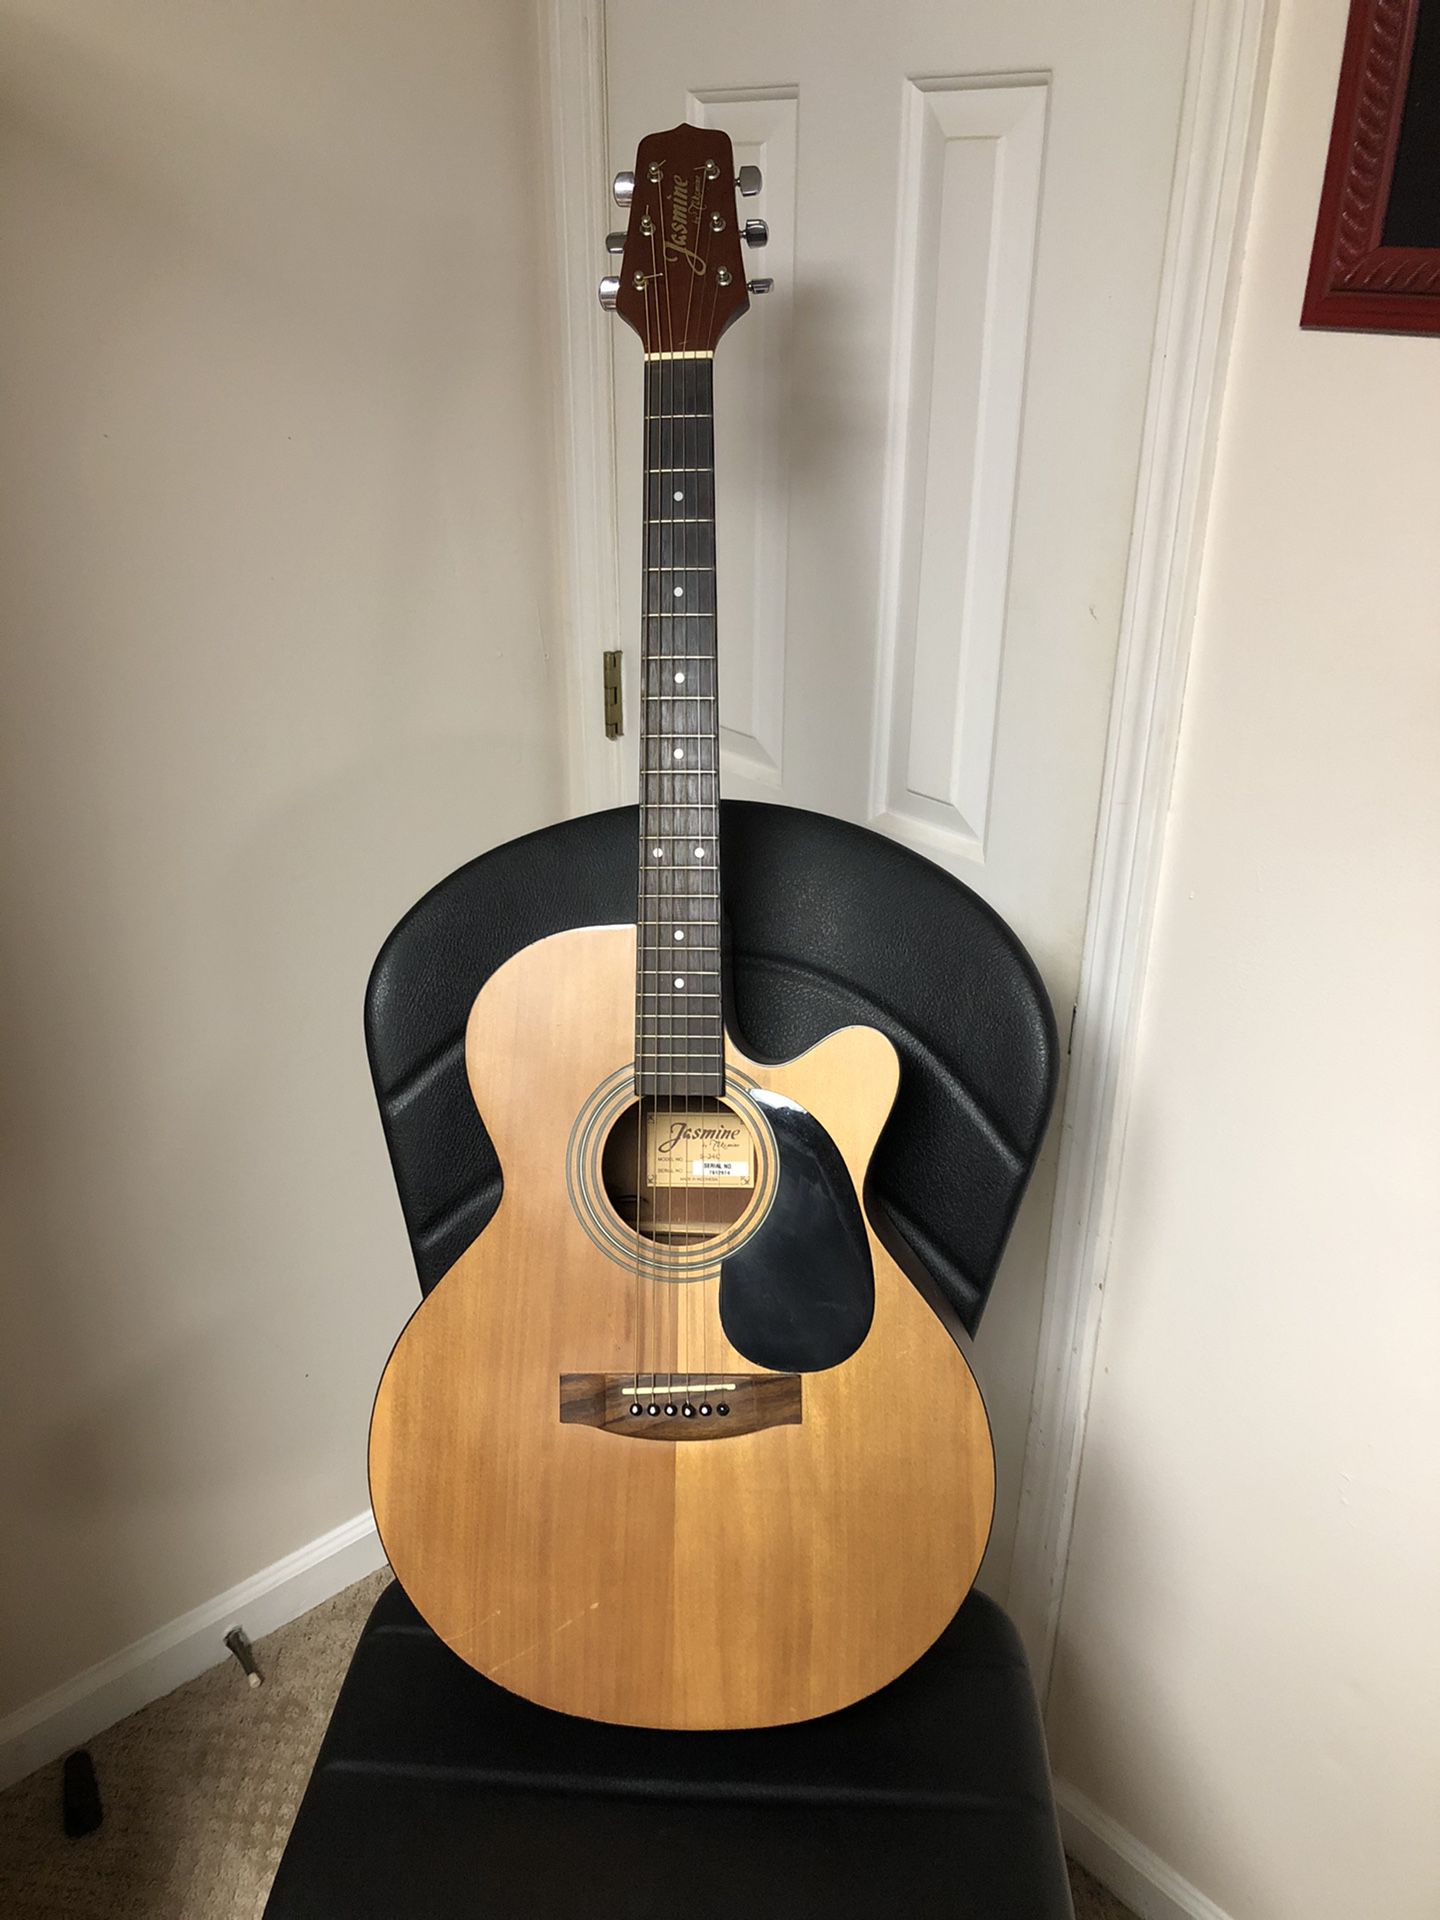 Jasmine by Takamine S-34C acoustic electric guitar (Cash or trade, whatcha got?)